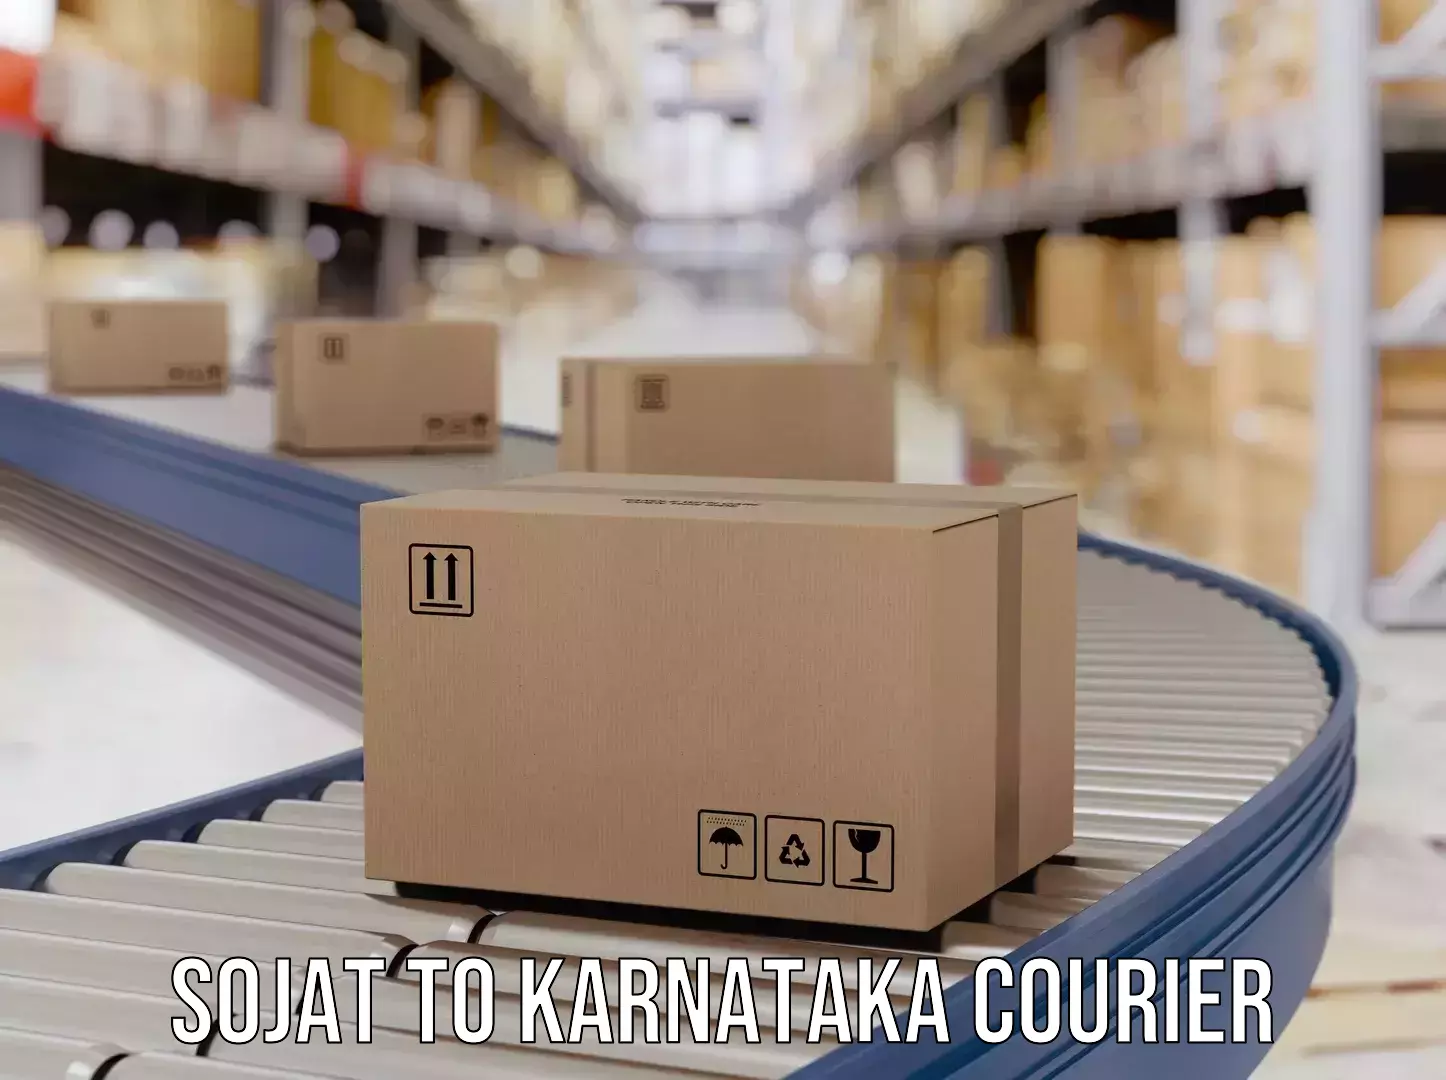 24/7 courier service Sojat to Tumkur